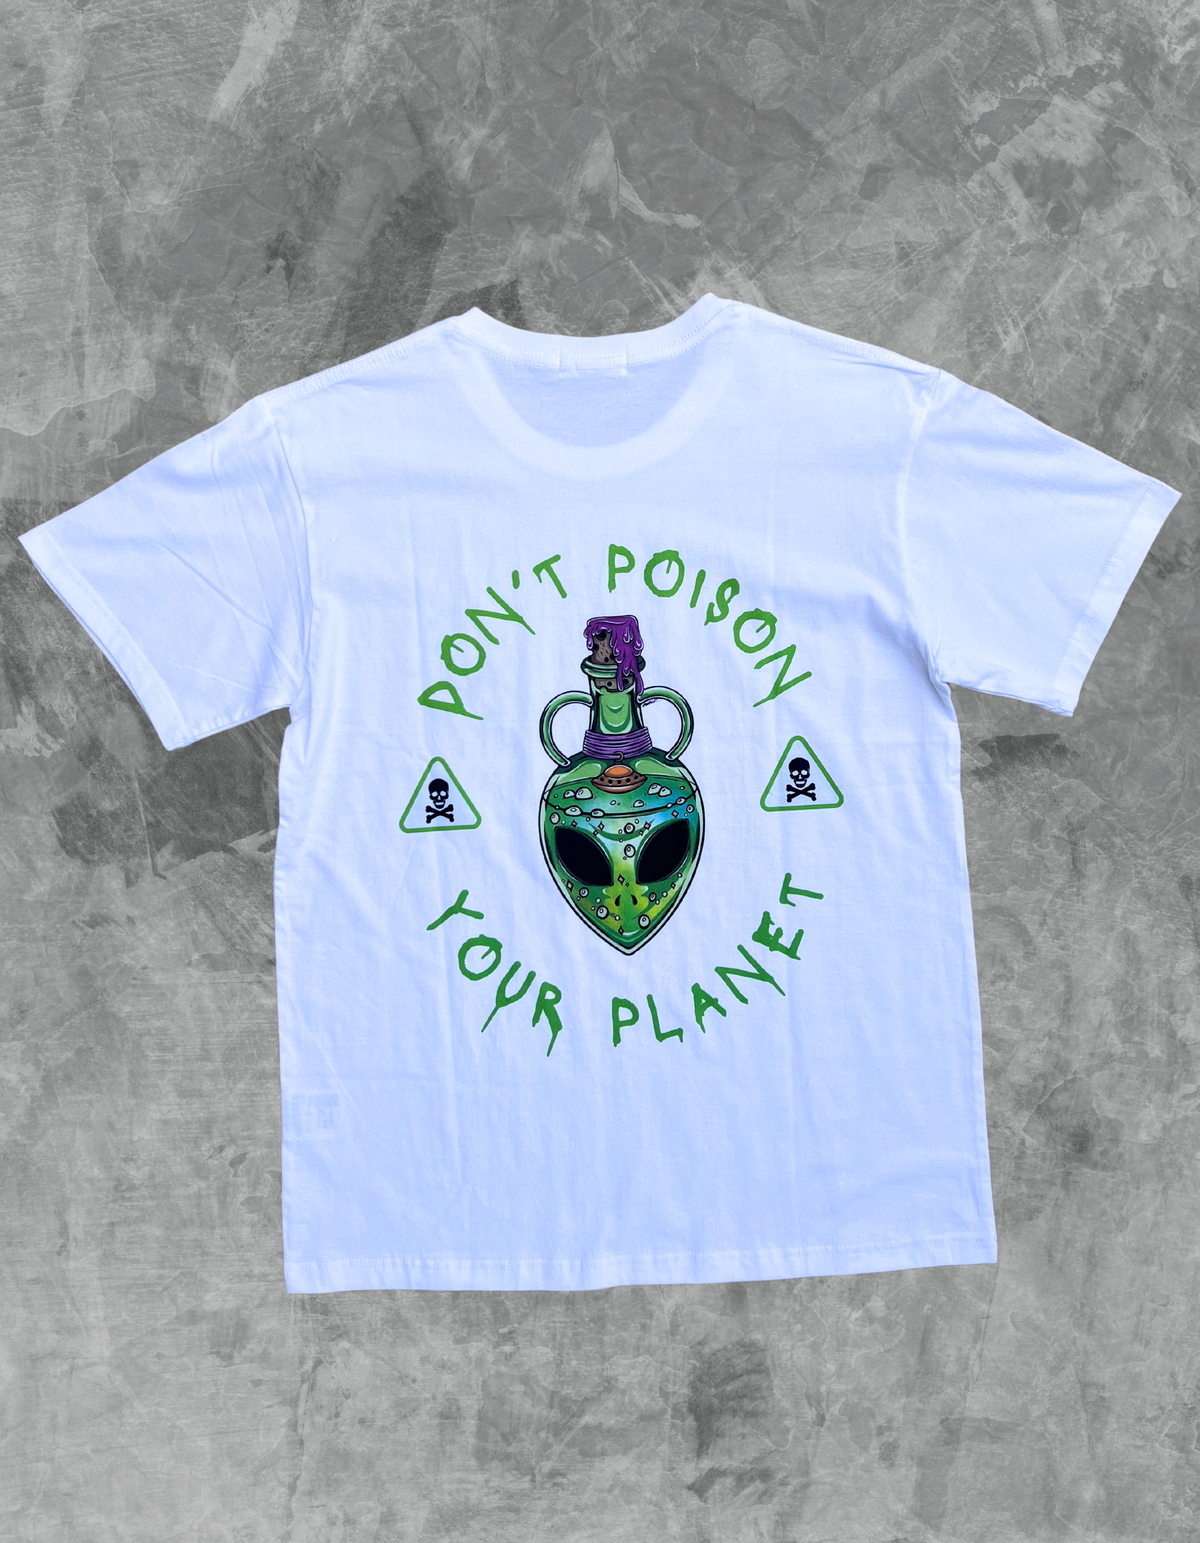 Don’t Poison Your Planet Tee